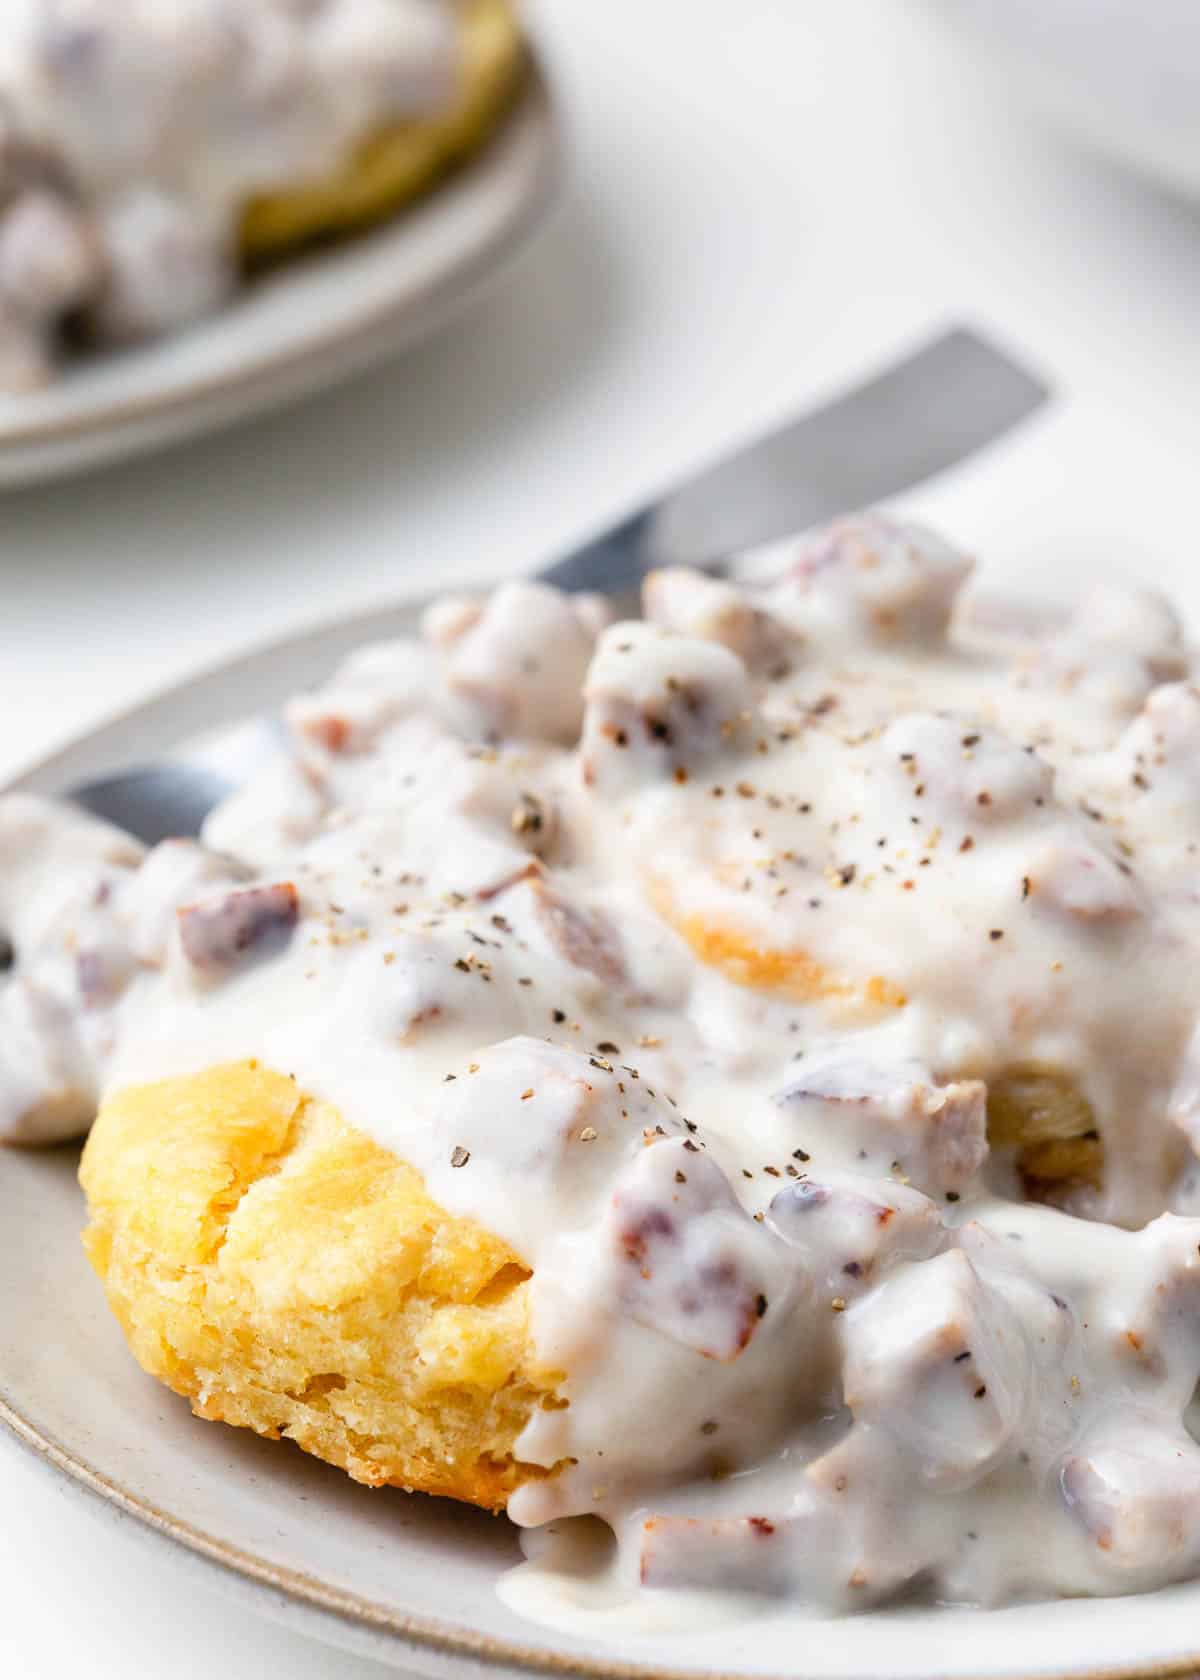 Biscuits and gravy on a white plate.